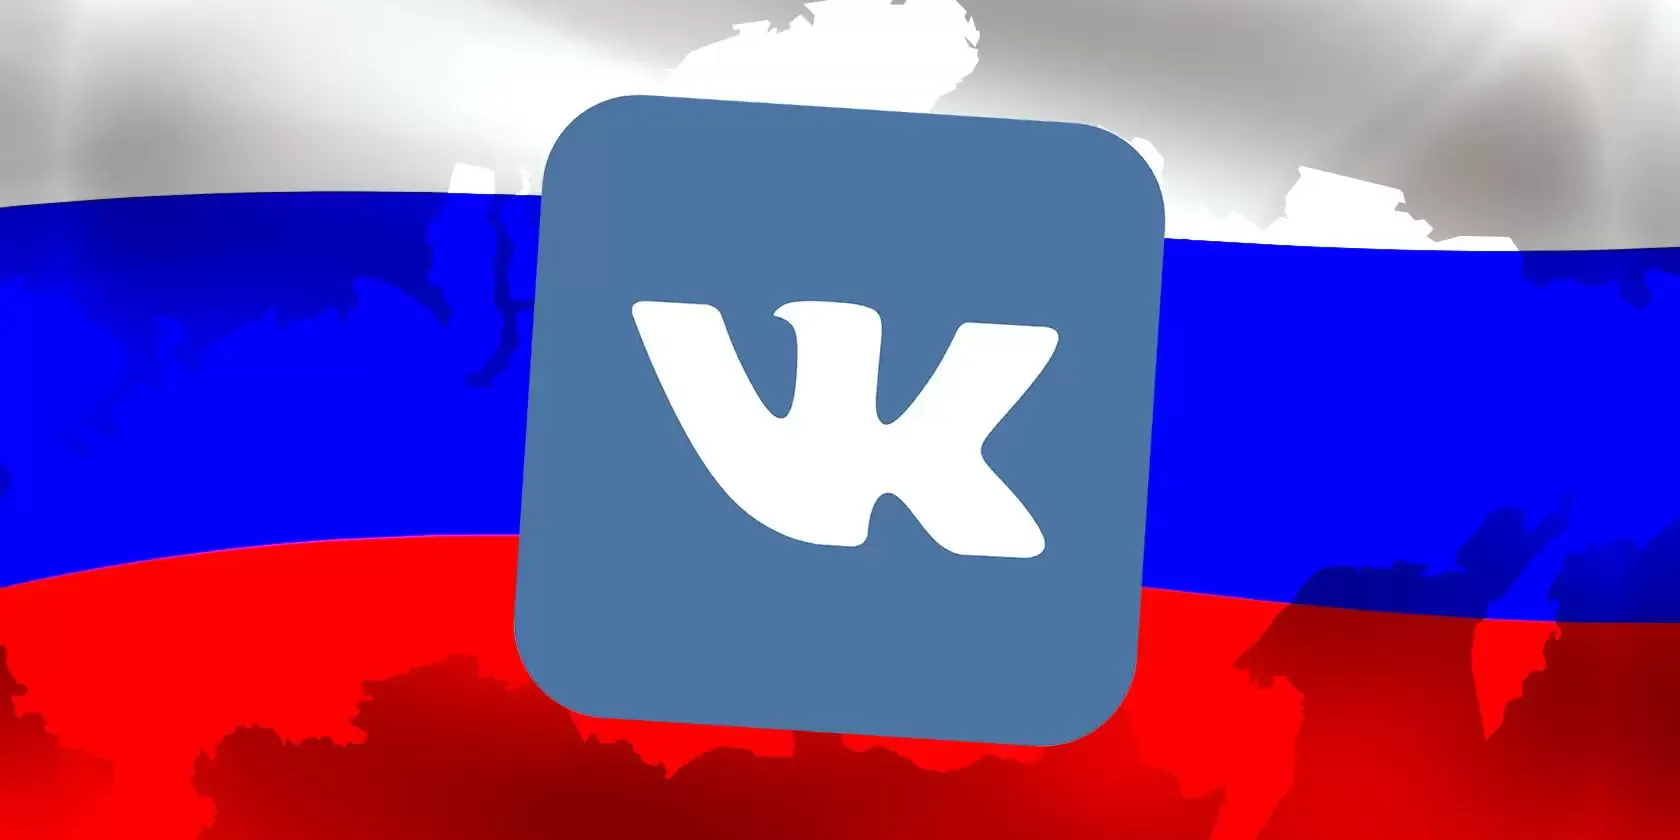 NFT support is coming to Vkontakte, Russia’s leading social media site